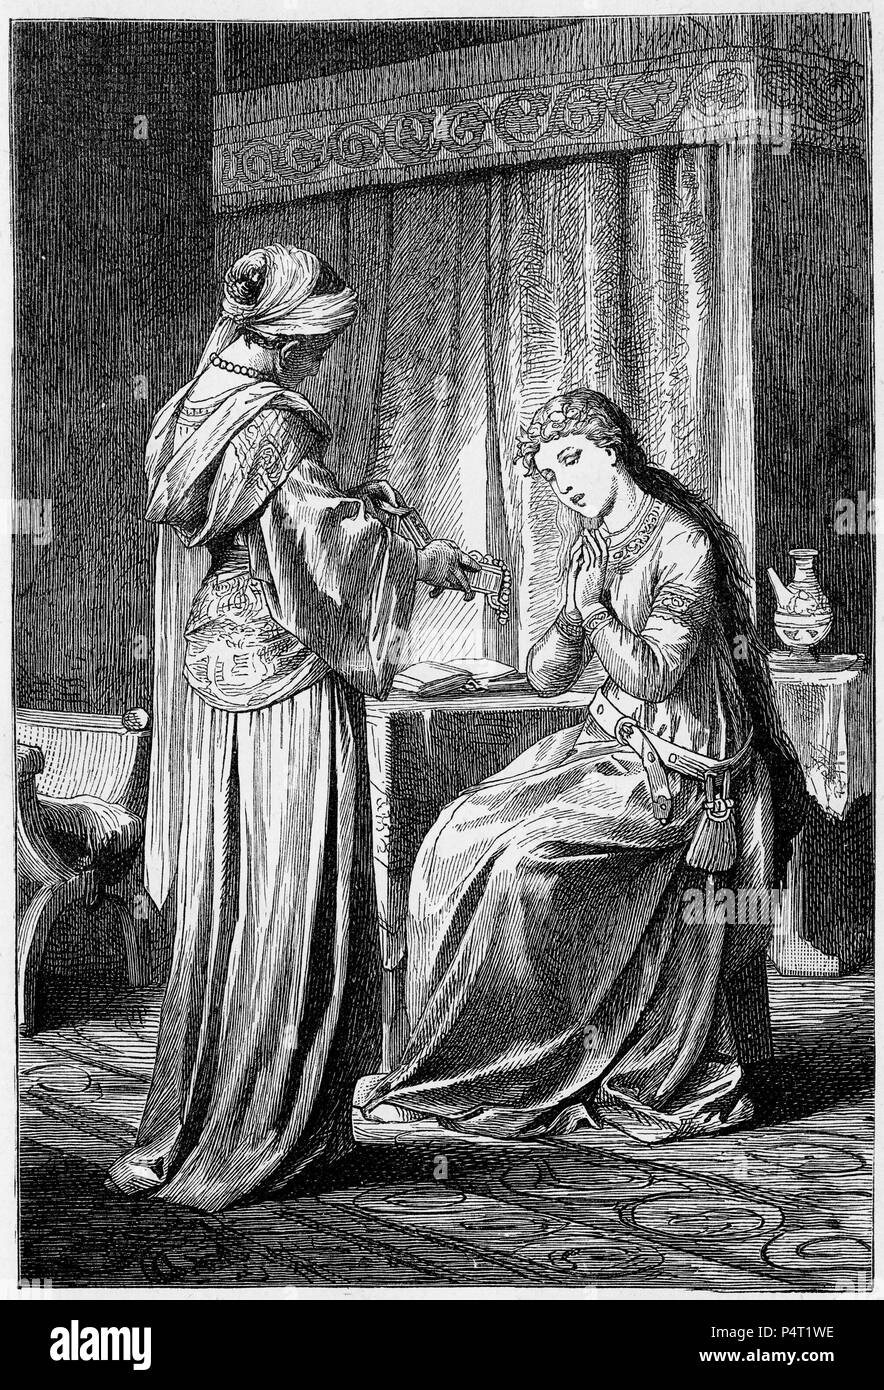 Engraving of two medieval women admiring the treasure in a jewelry box. From an illustrated copy of Ivanhoe, 1878. Stock Photo